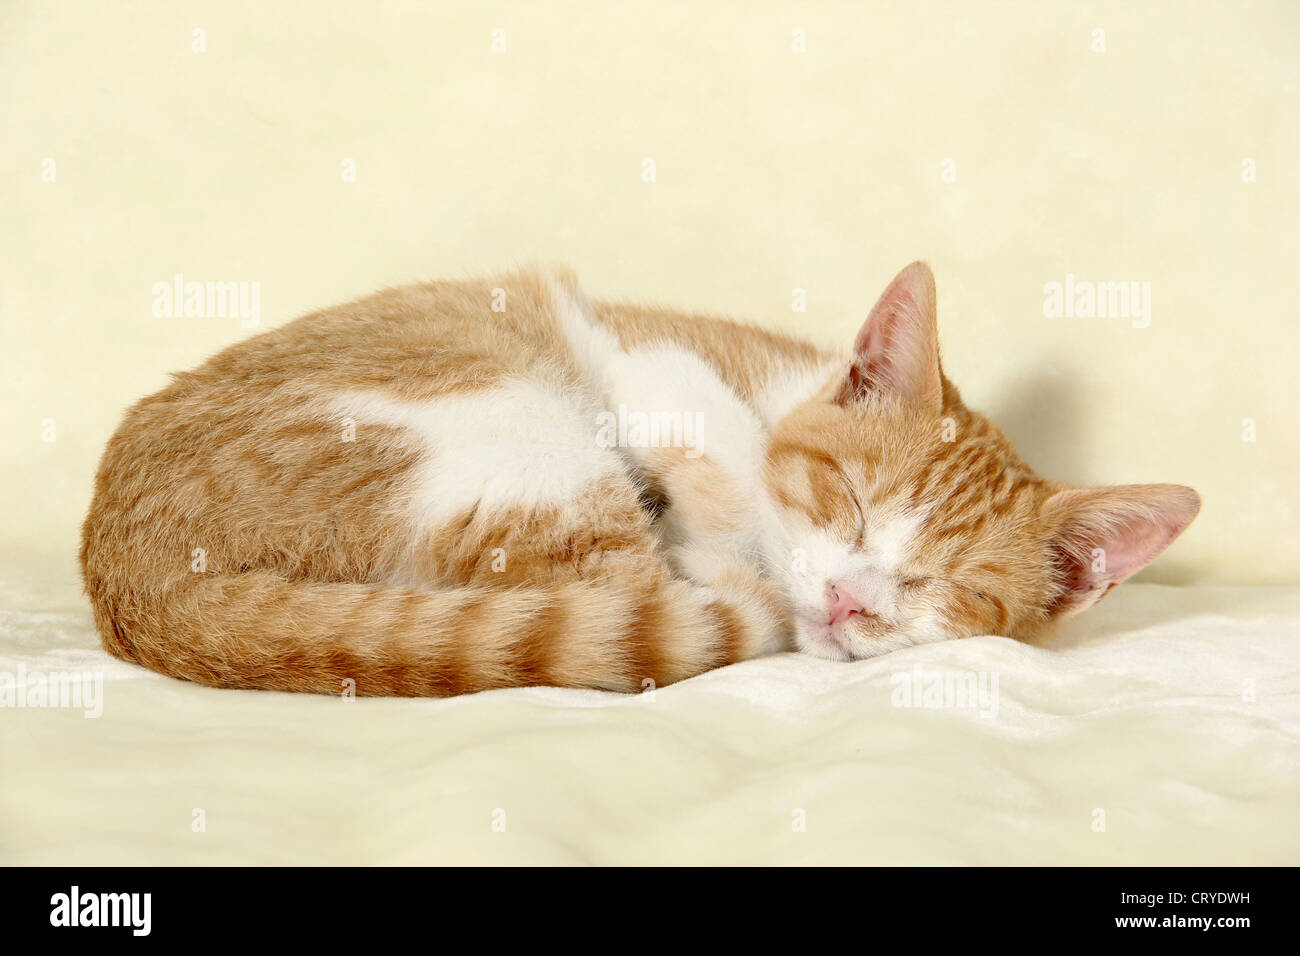 Domestic Cat sleeping curled-up Studio picture against white background ...